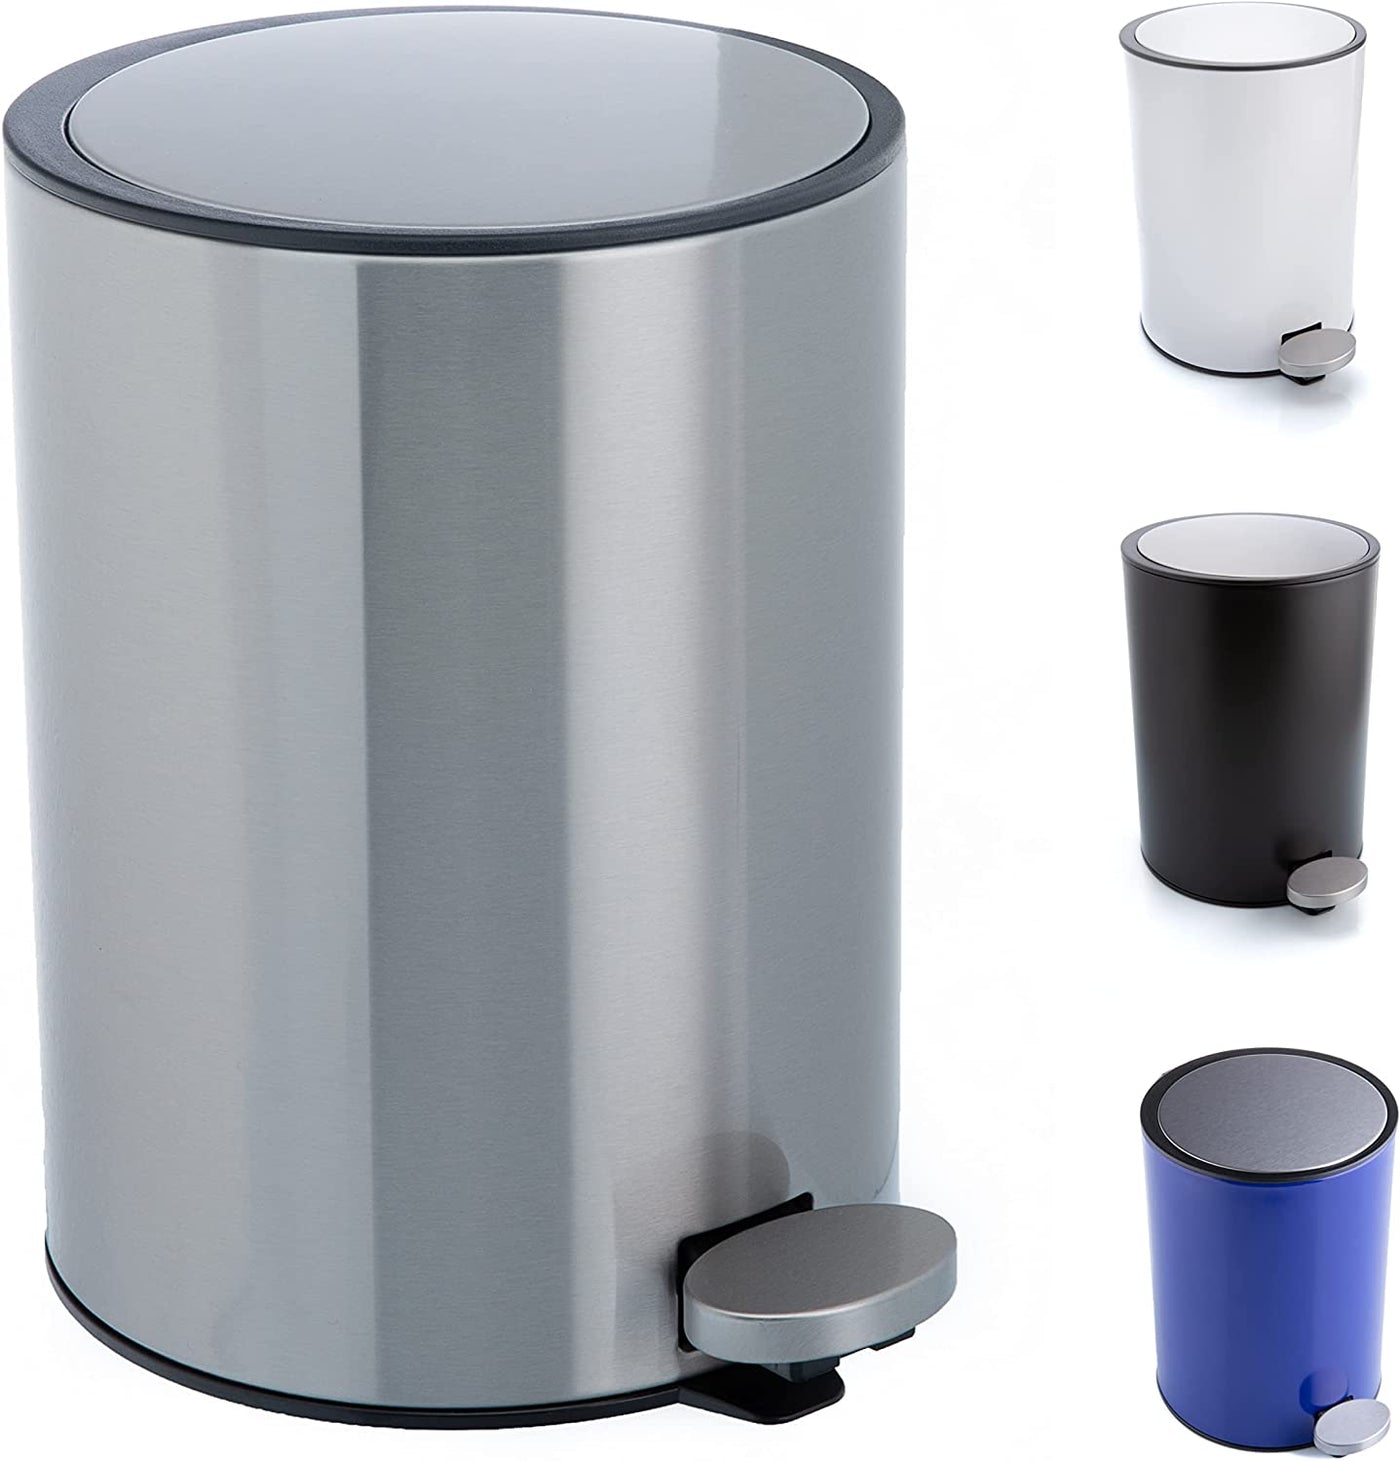 Bathroom Trash Can: 3L Stainless Steel Bucket with Softclose System